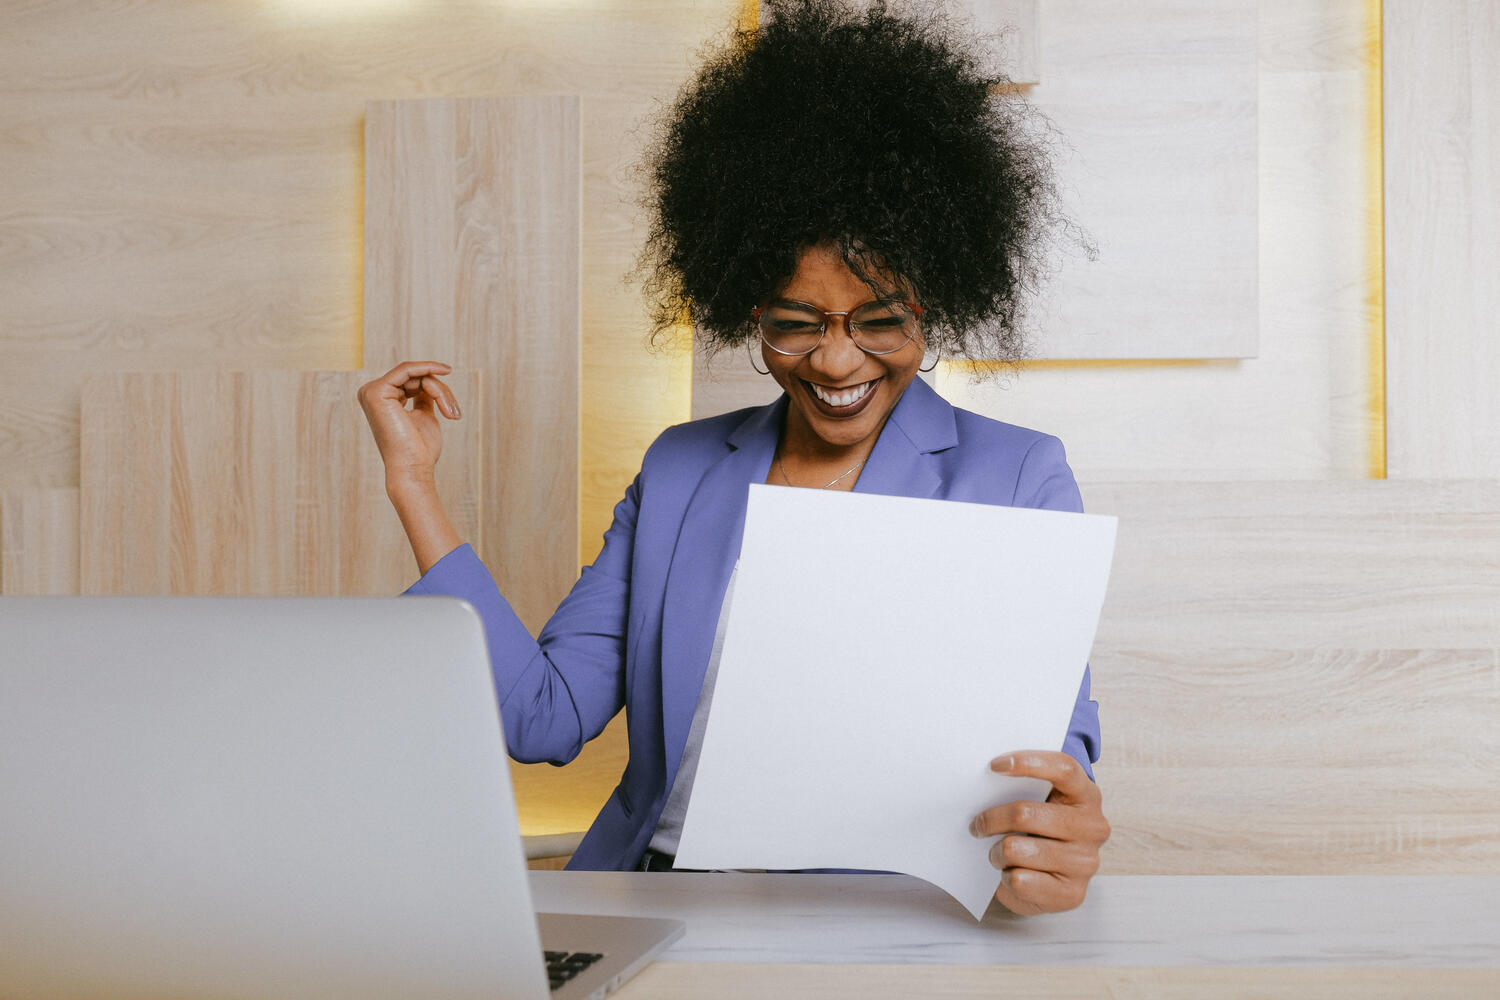 Smiling woman reading a resume